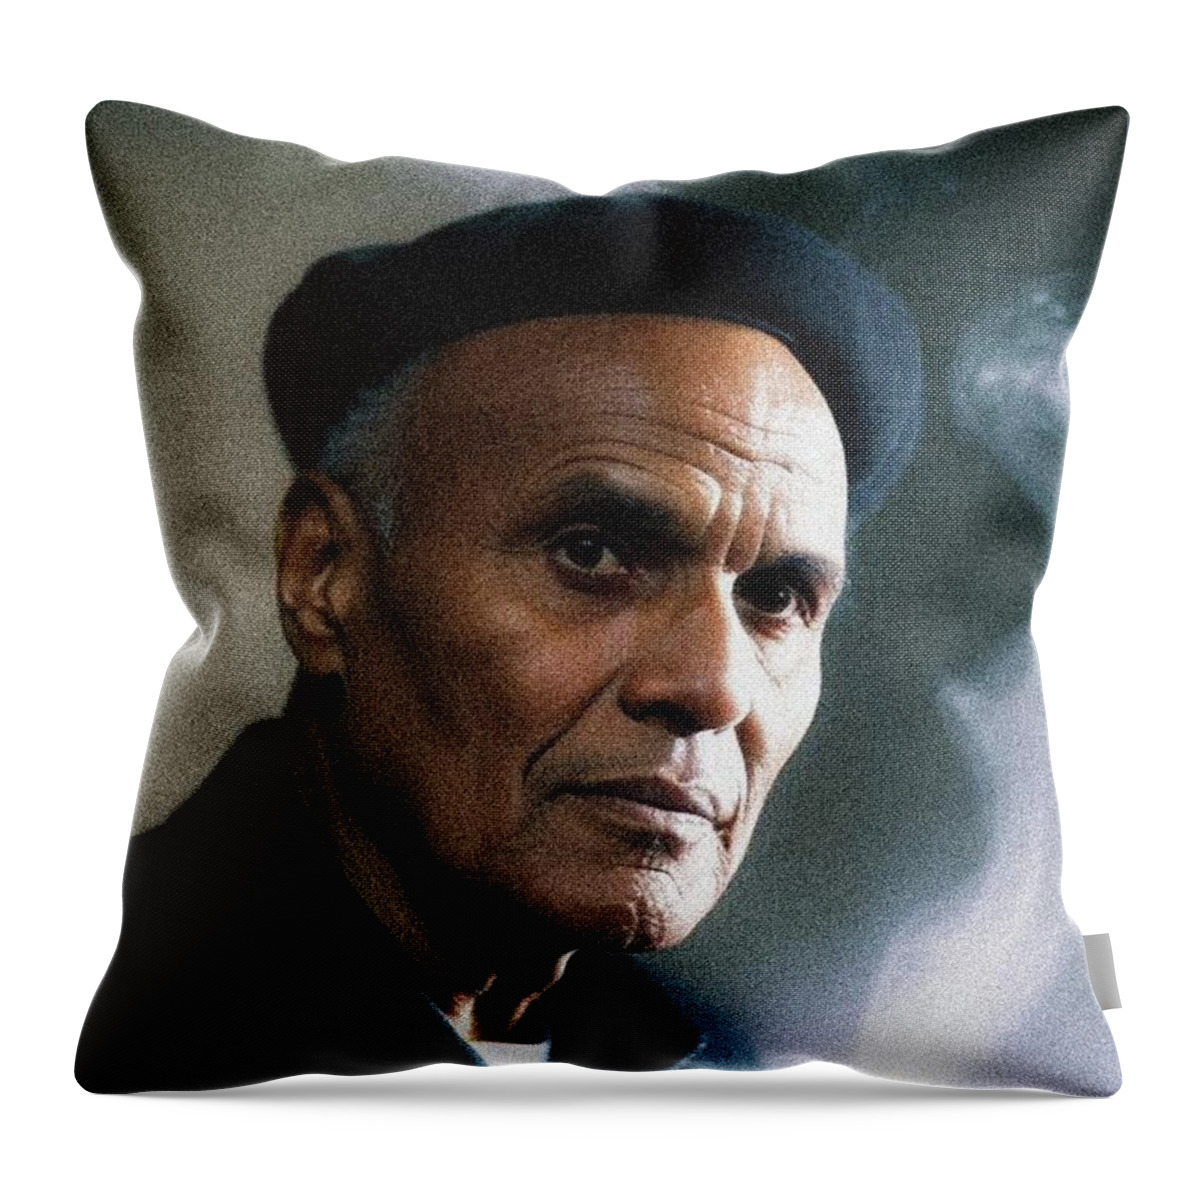 Harry Throw Pillow featuring the photograph Harry Belafonte, Music Star by Esoterica Art Agency